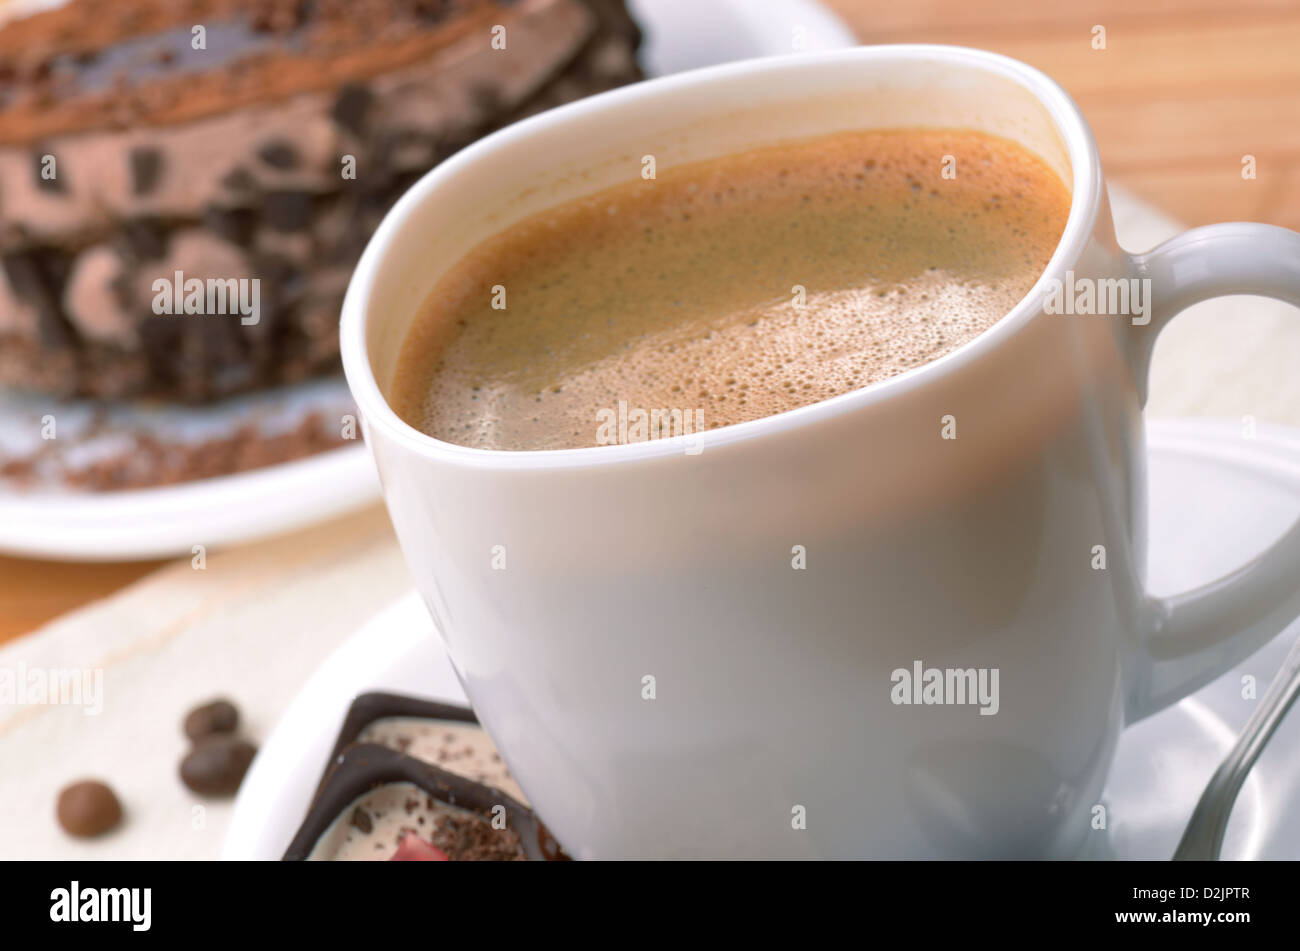 Coffee cup with chocolate dessert cake aside Stock Photo